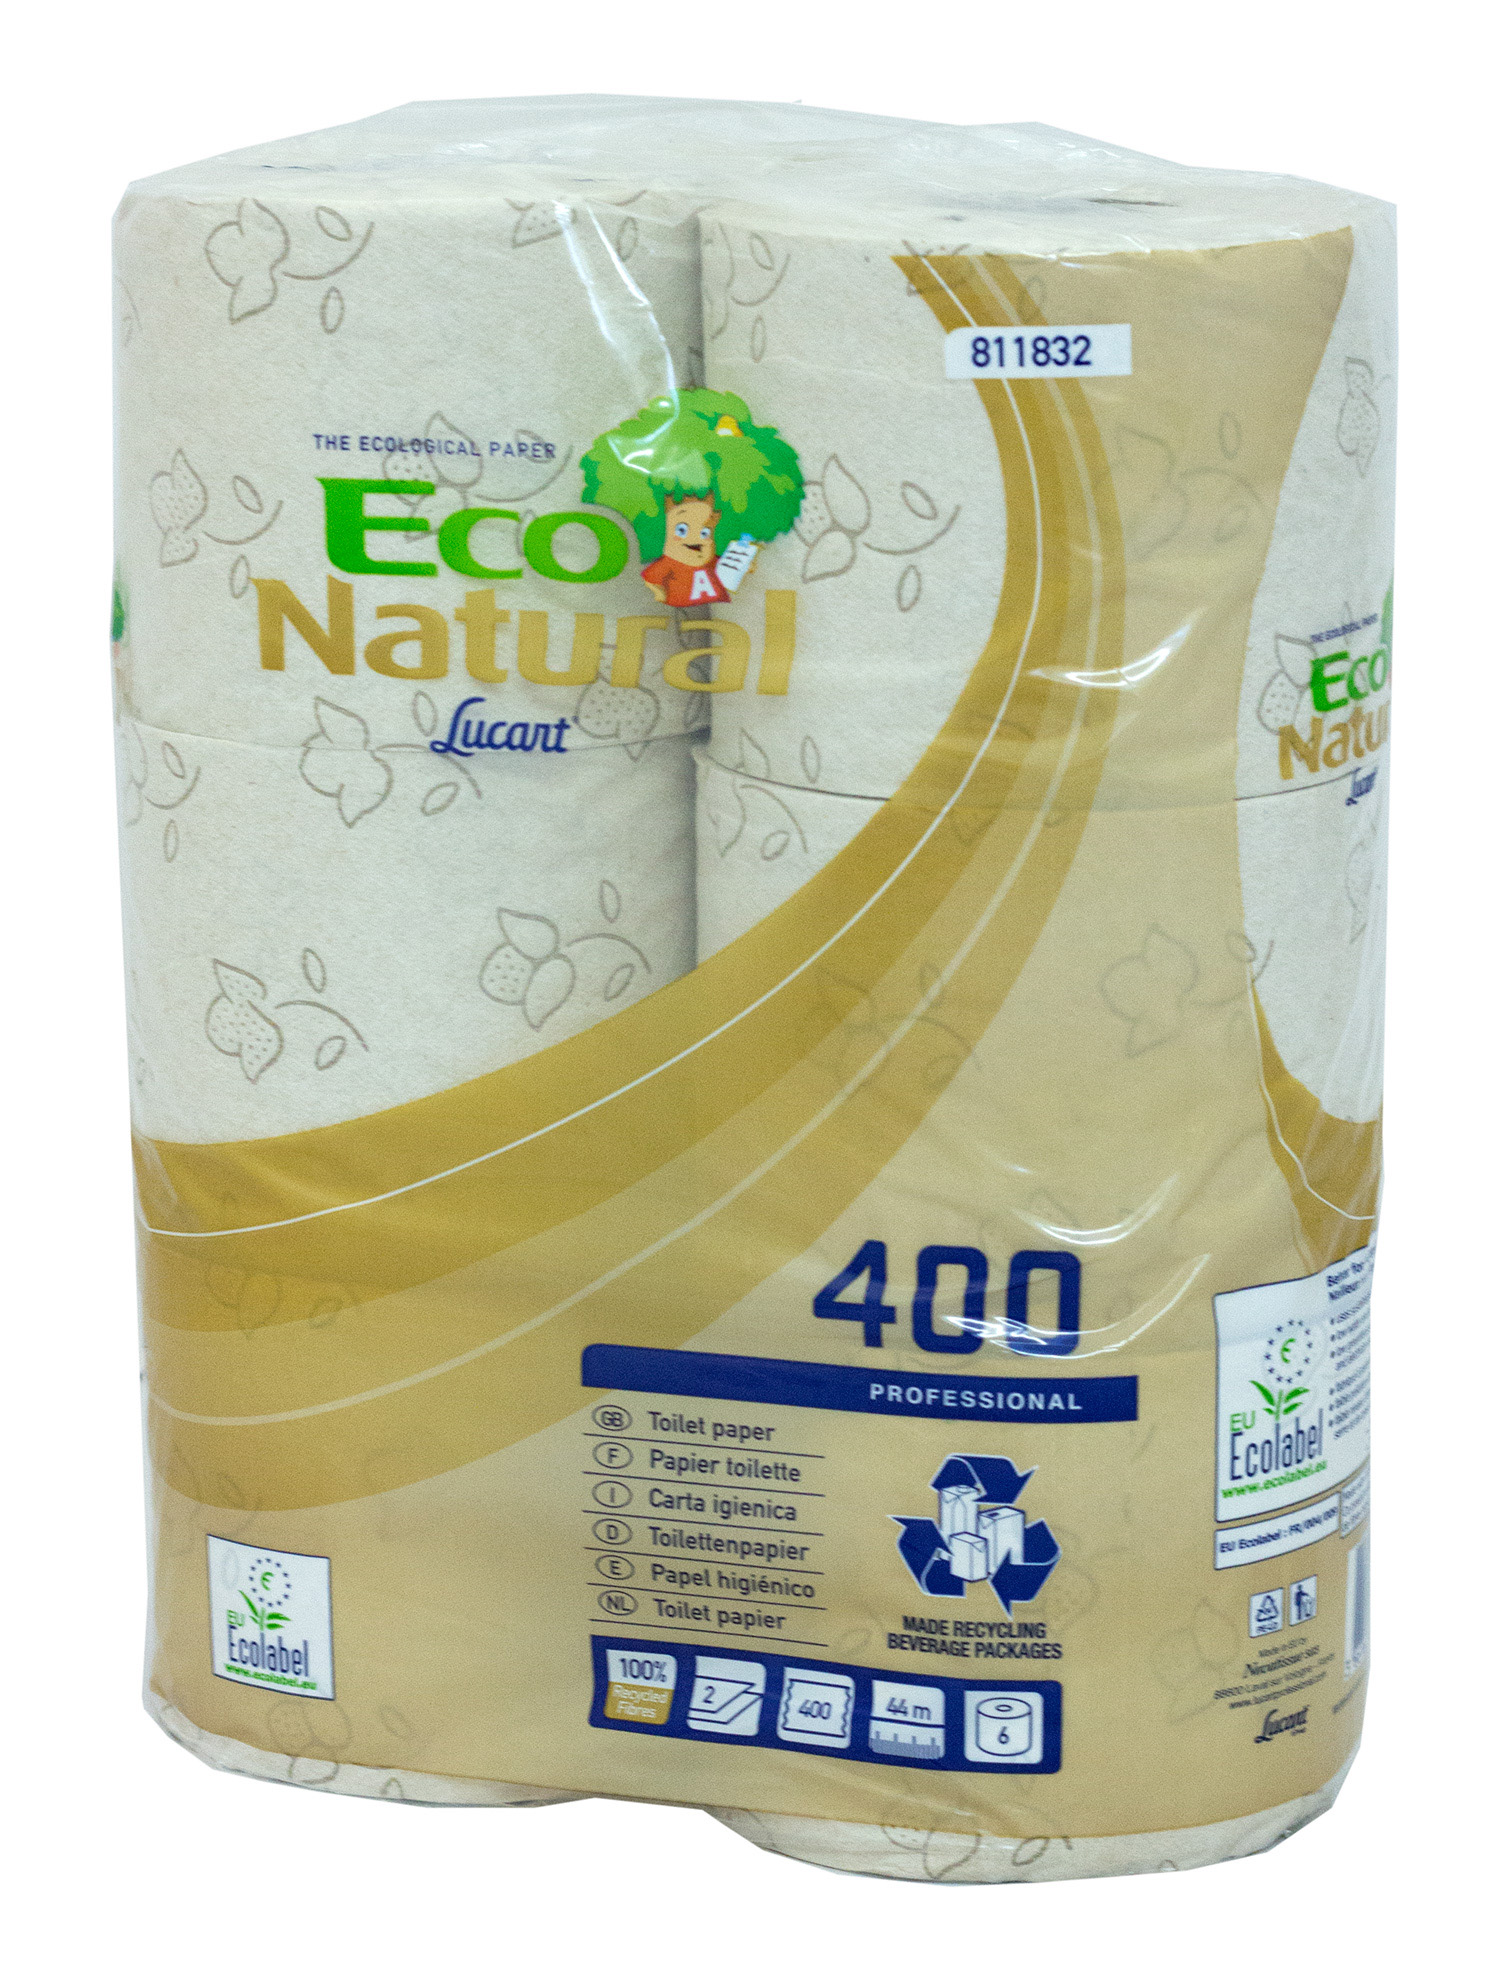 Specialising In Eco Natural Recycled Toilet Rolls 2Ply 400 Sheets 30 Rolls For Your Business